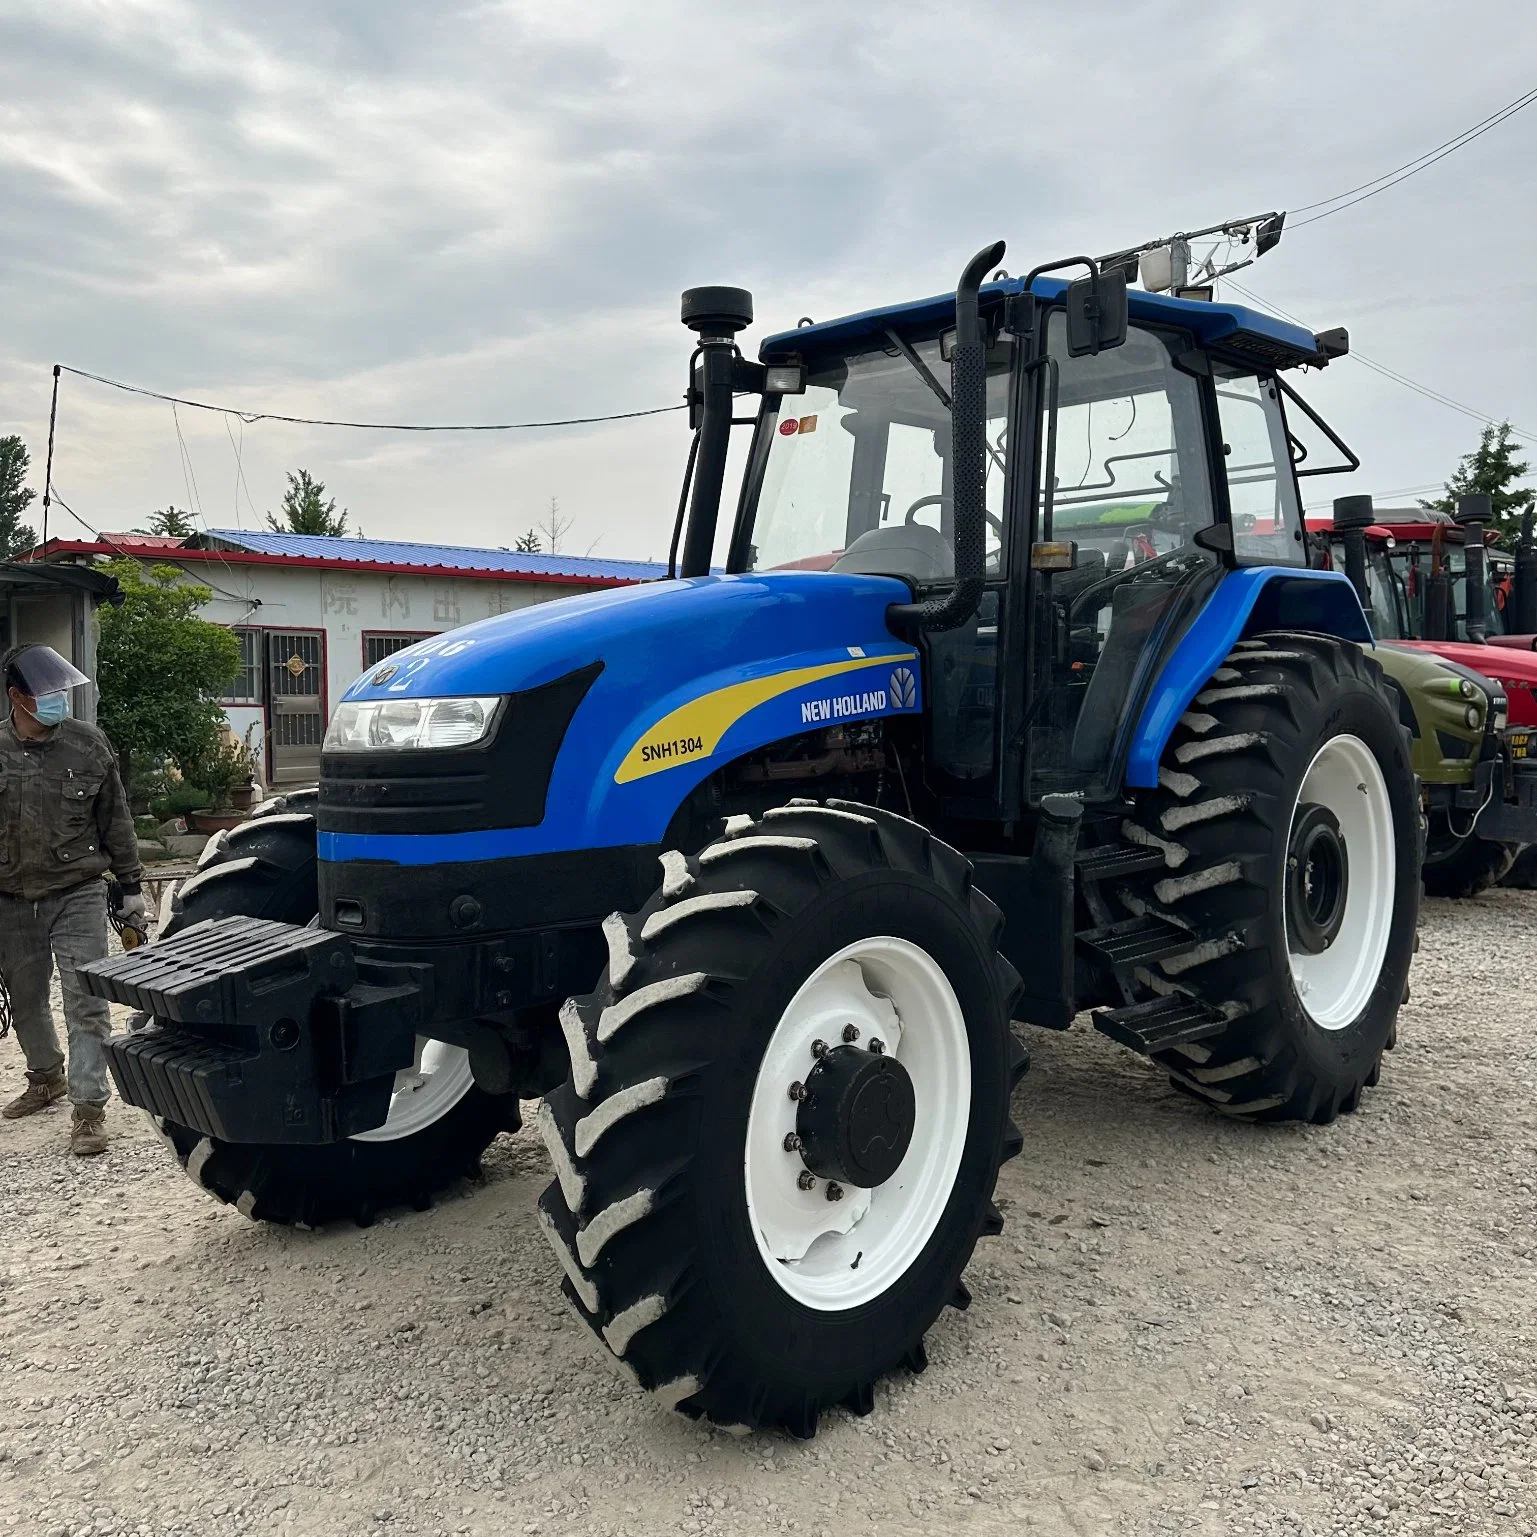 Best Quality Used Tractor New Holland Snh1304 130HP 4WD Farm Tractor Farm Machinery Agricultural Machinery for Sale